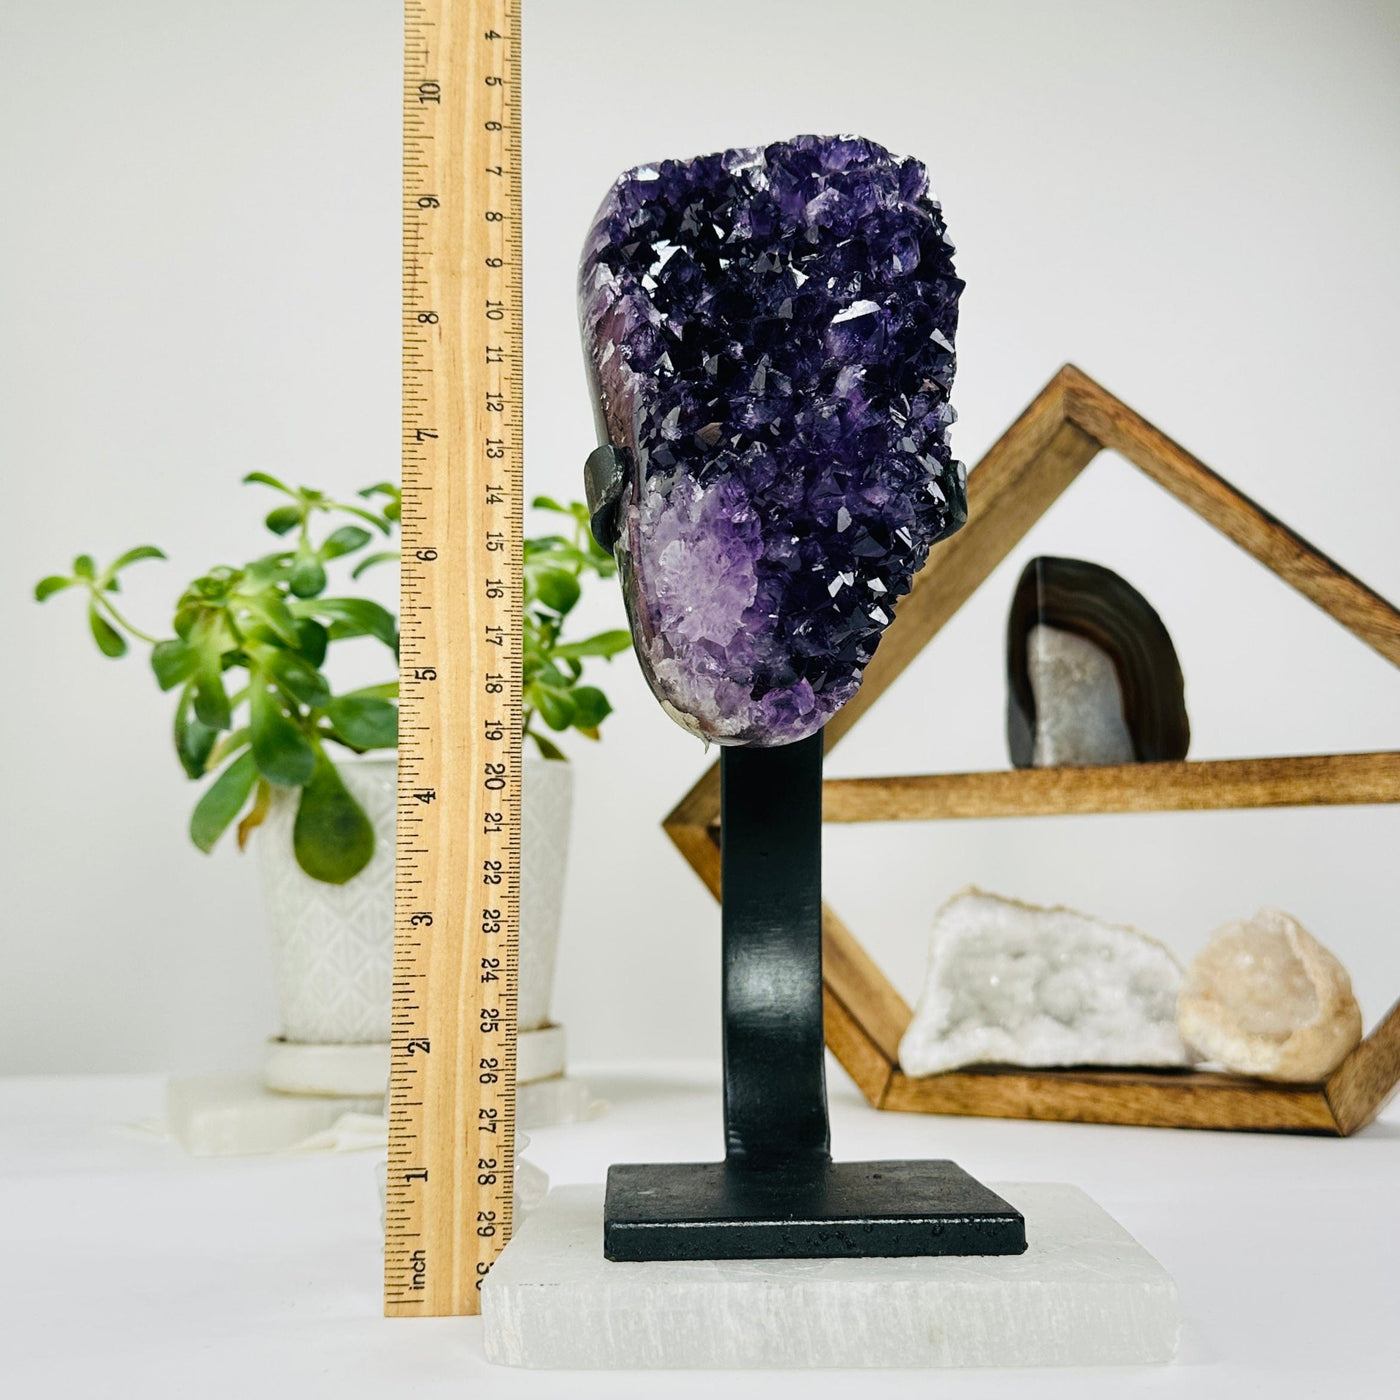 amethyst on metal stand next to a ruler for size reference